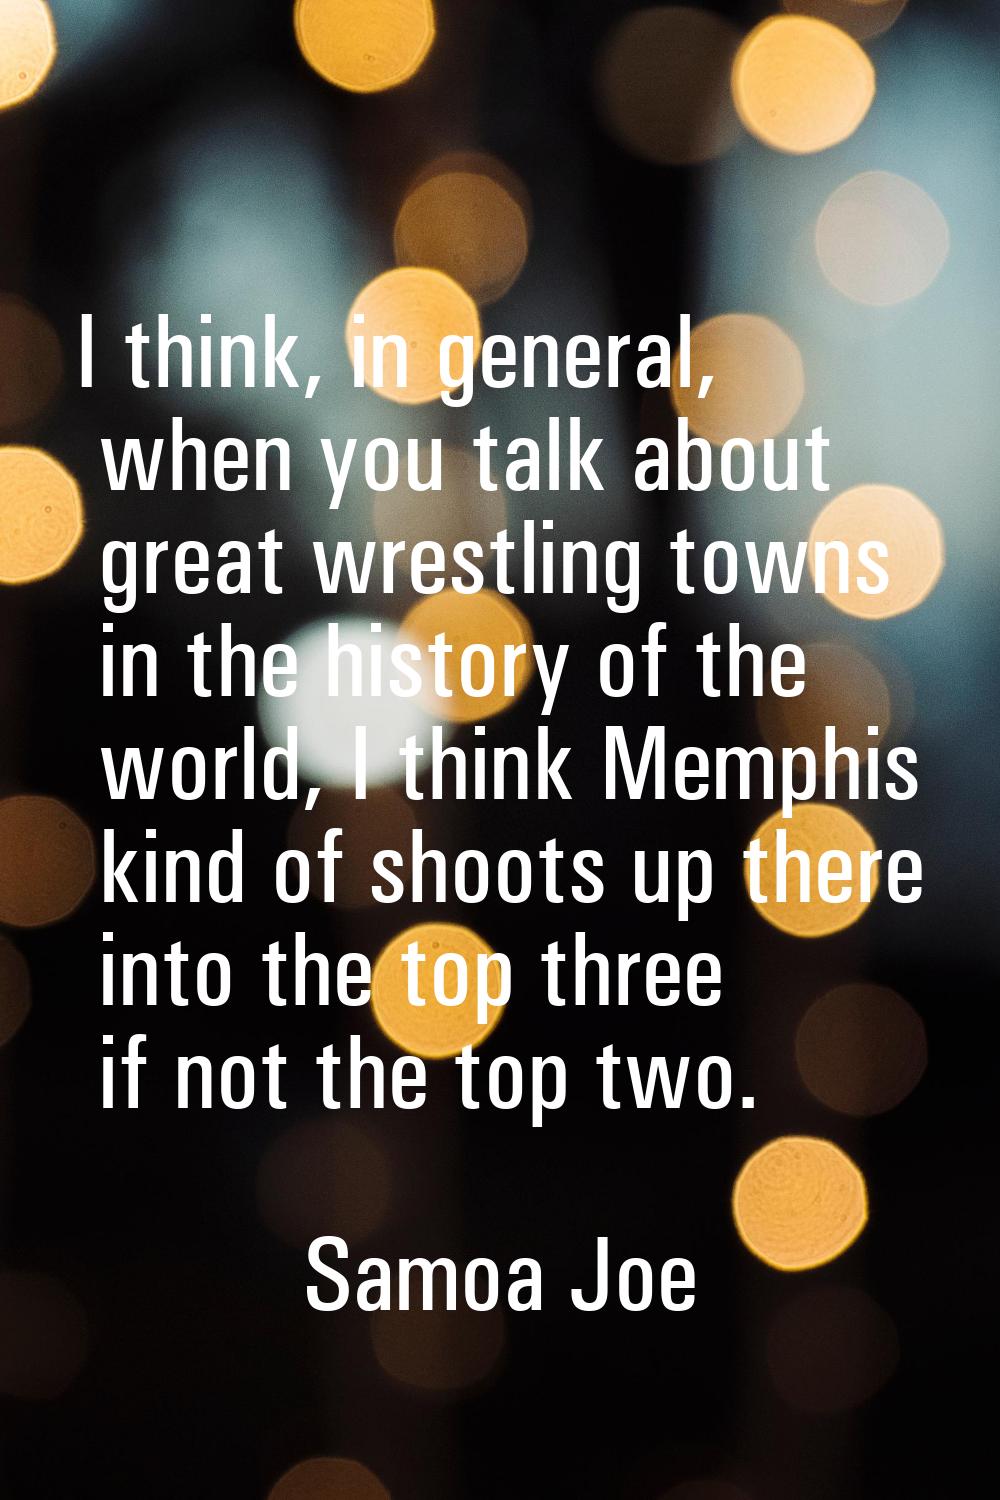 I think, in general, when you talk about great wrestling towns in the history of the world, I think